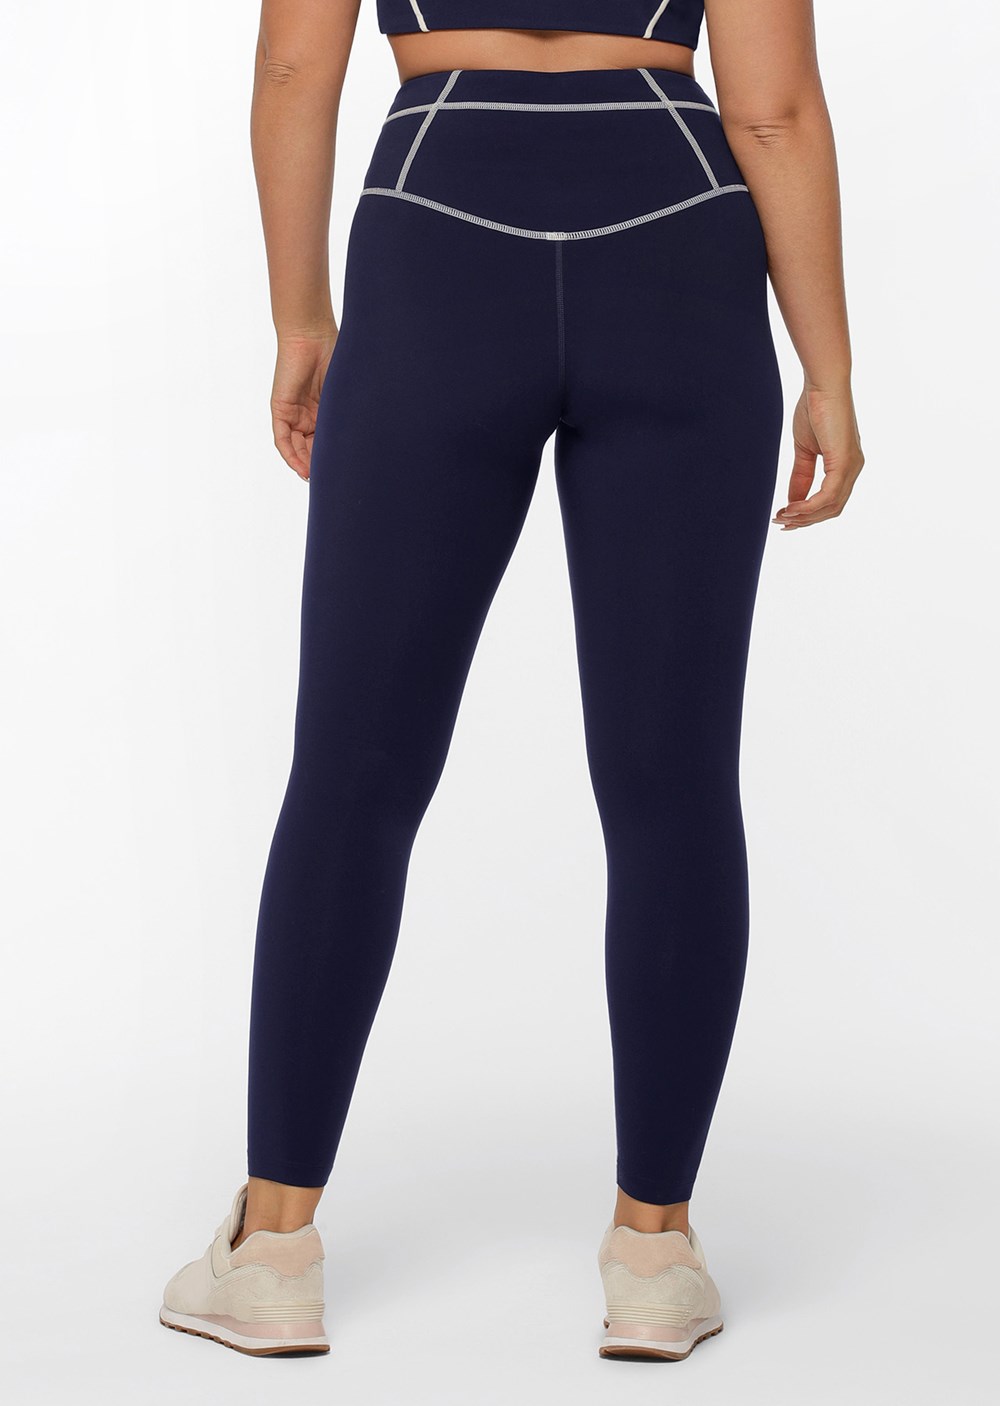 Lorna Jane Leggings UK Outlet Store - French Navy Pro Ath. Core Stability  Full Length Womens